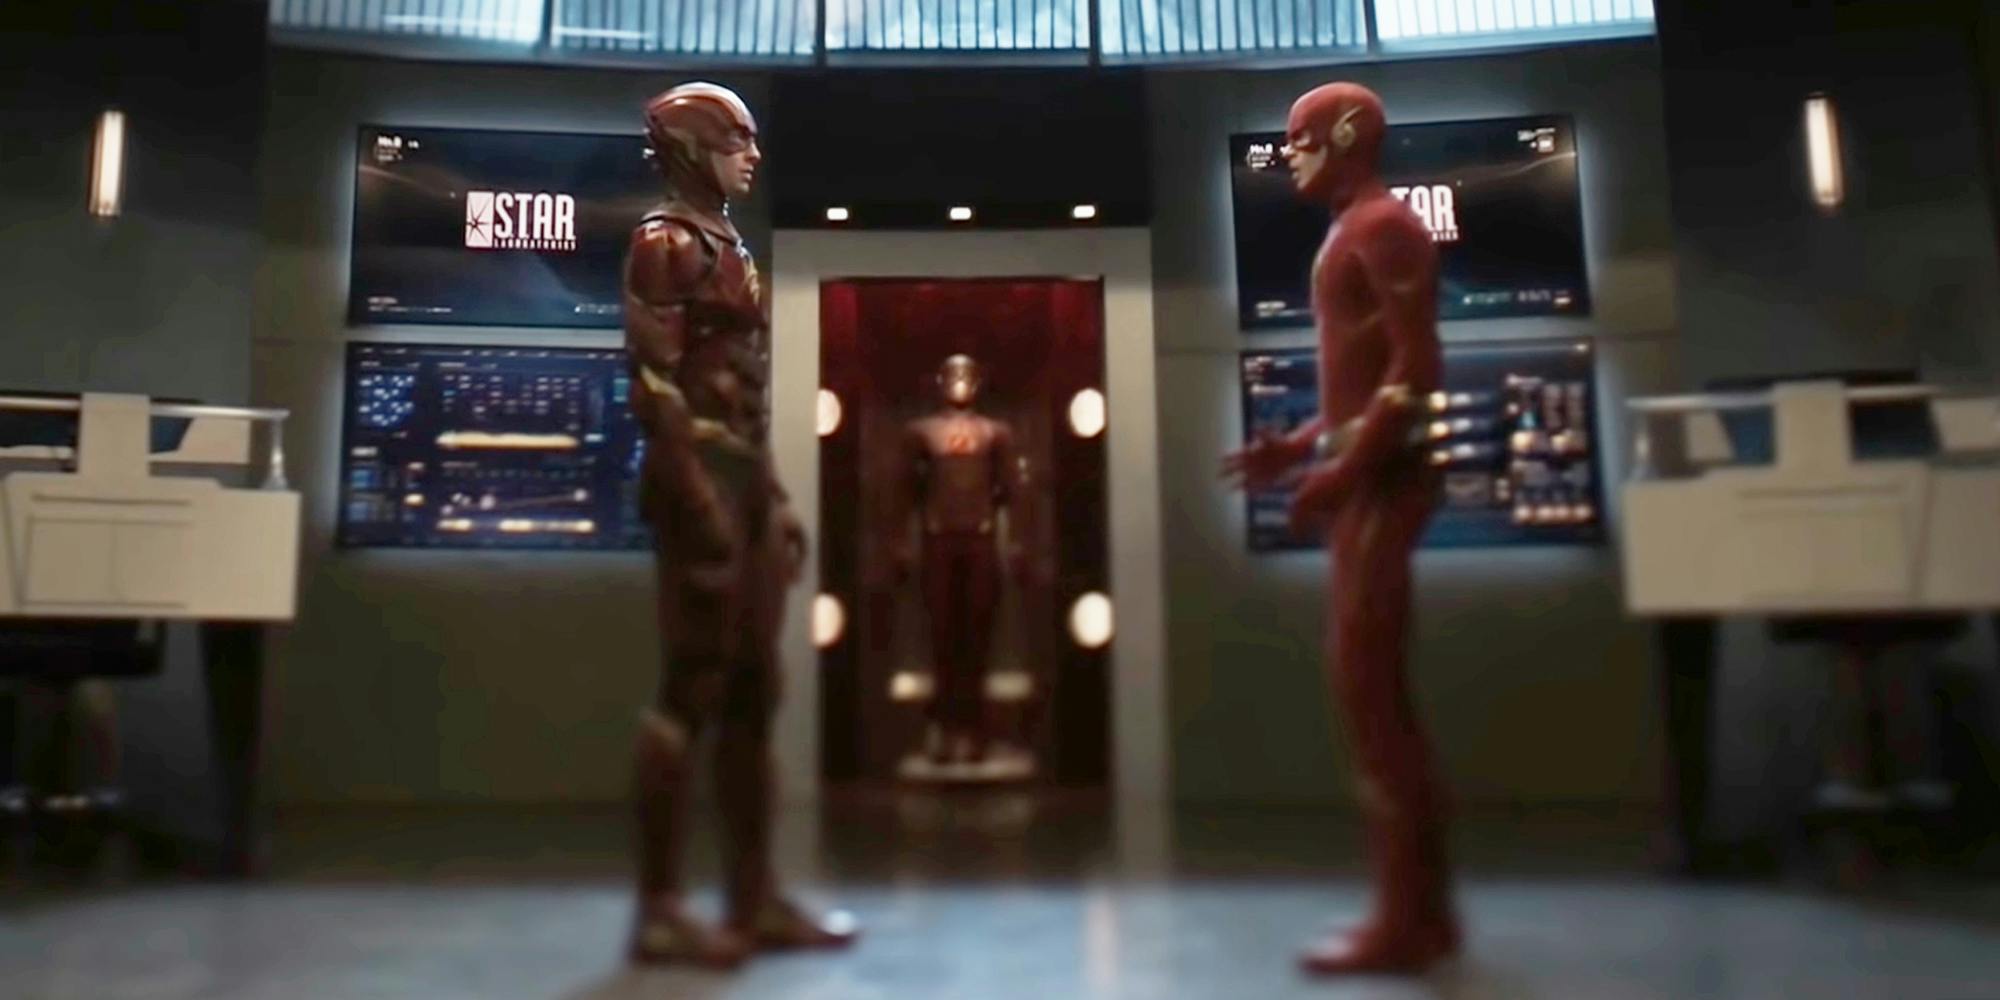 DC MOVIE FLASH and CW TV FLASH